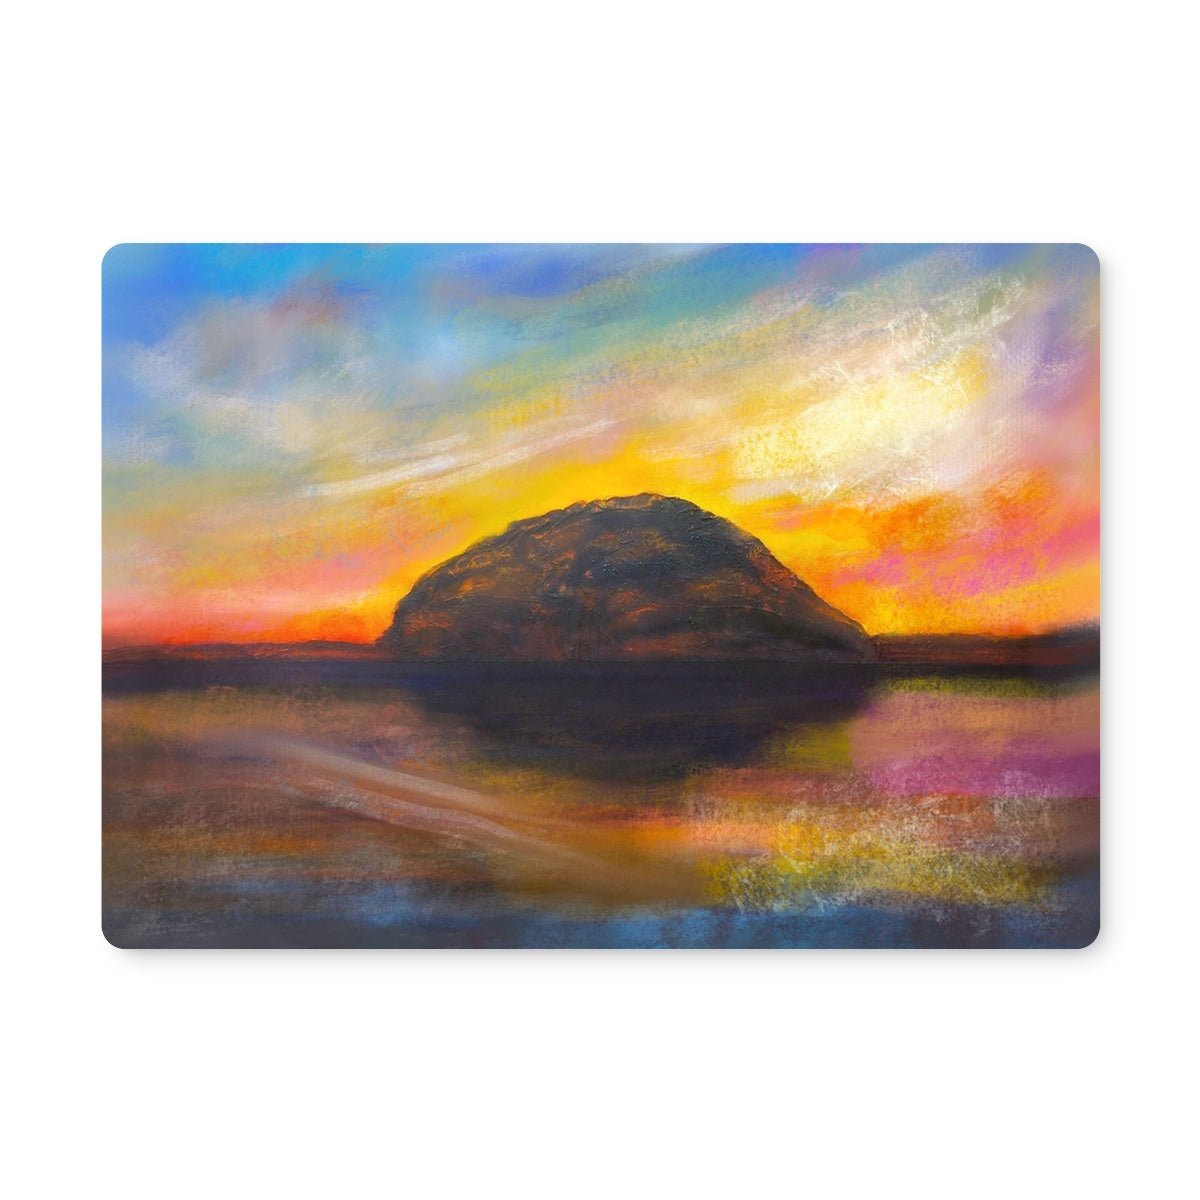 Ailsa Craig Dusk Arran Art Gifts Placemat-Placemats-Arran Art Gallery-4 Placemats-Paintings, Prints, Homeware, Art Gifts From Scotland By Scottish Artist Kevin Hunter